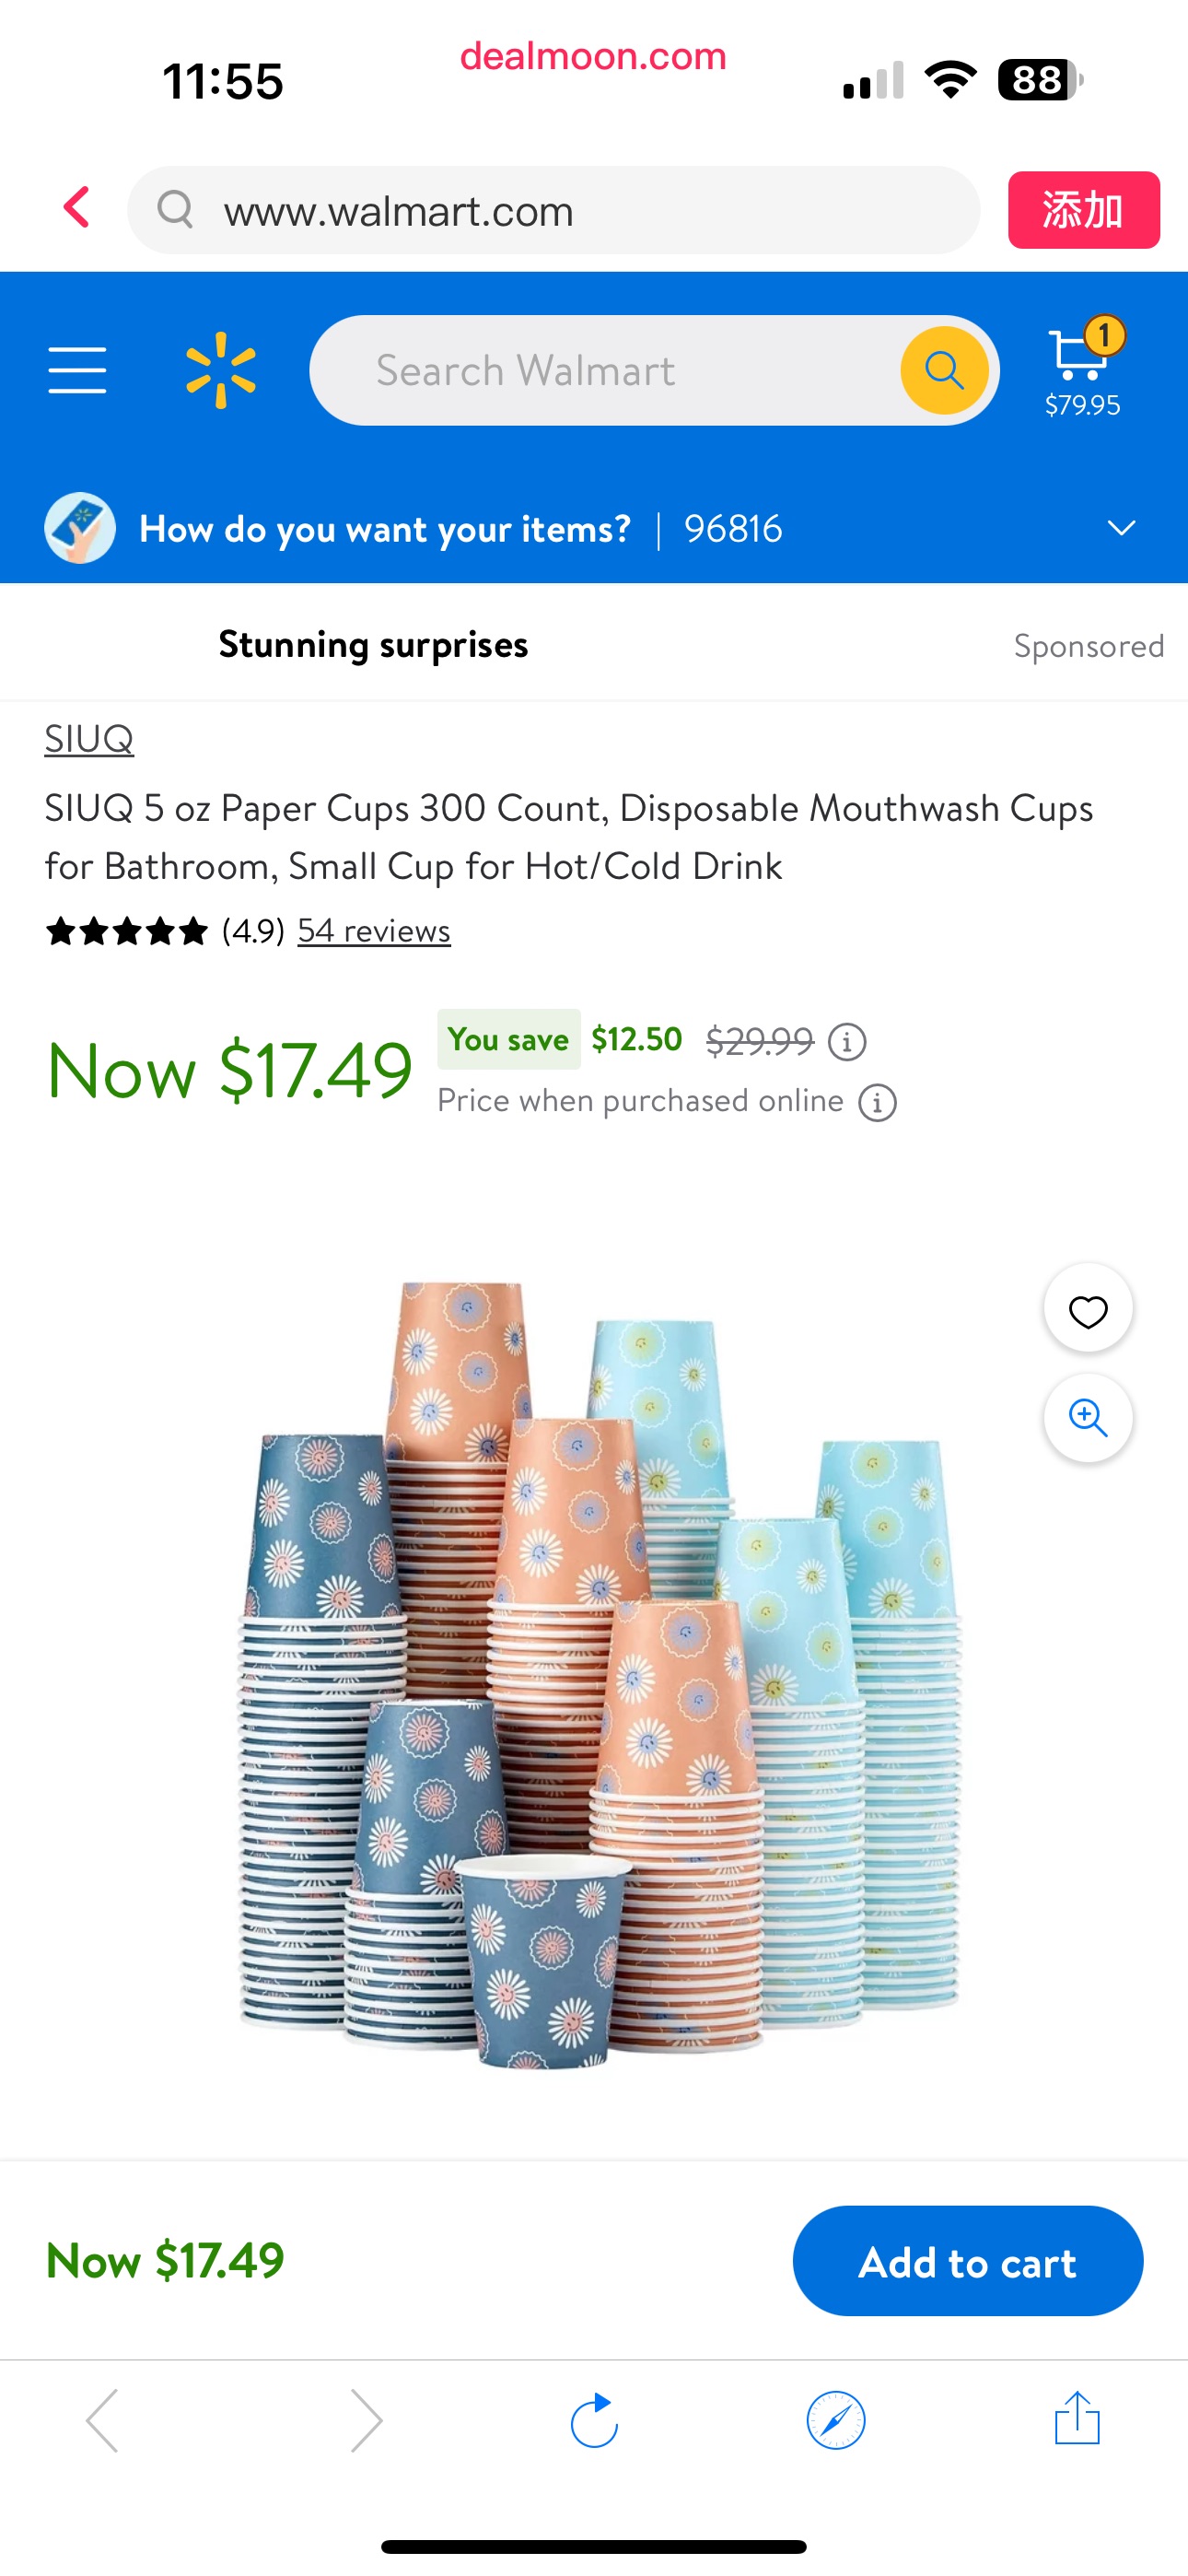 SIUQ 5 oz Paper Cups 300 Count, Disposable Mouthwash Cups for Bathroom, Small Cup for Hot/Cold Drink - Walmart.com一次性杯子